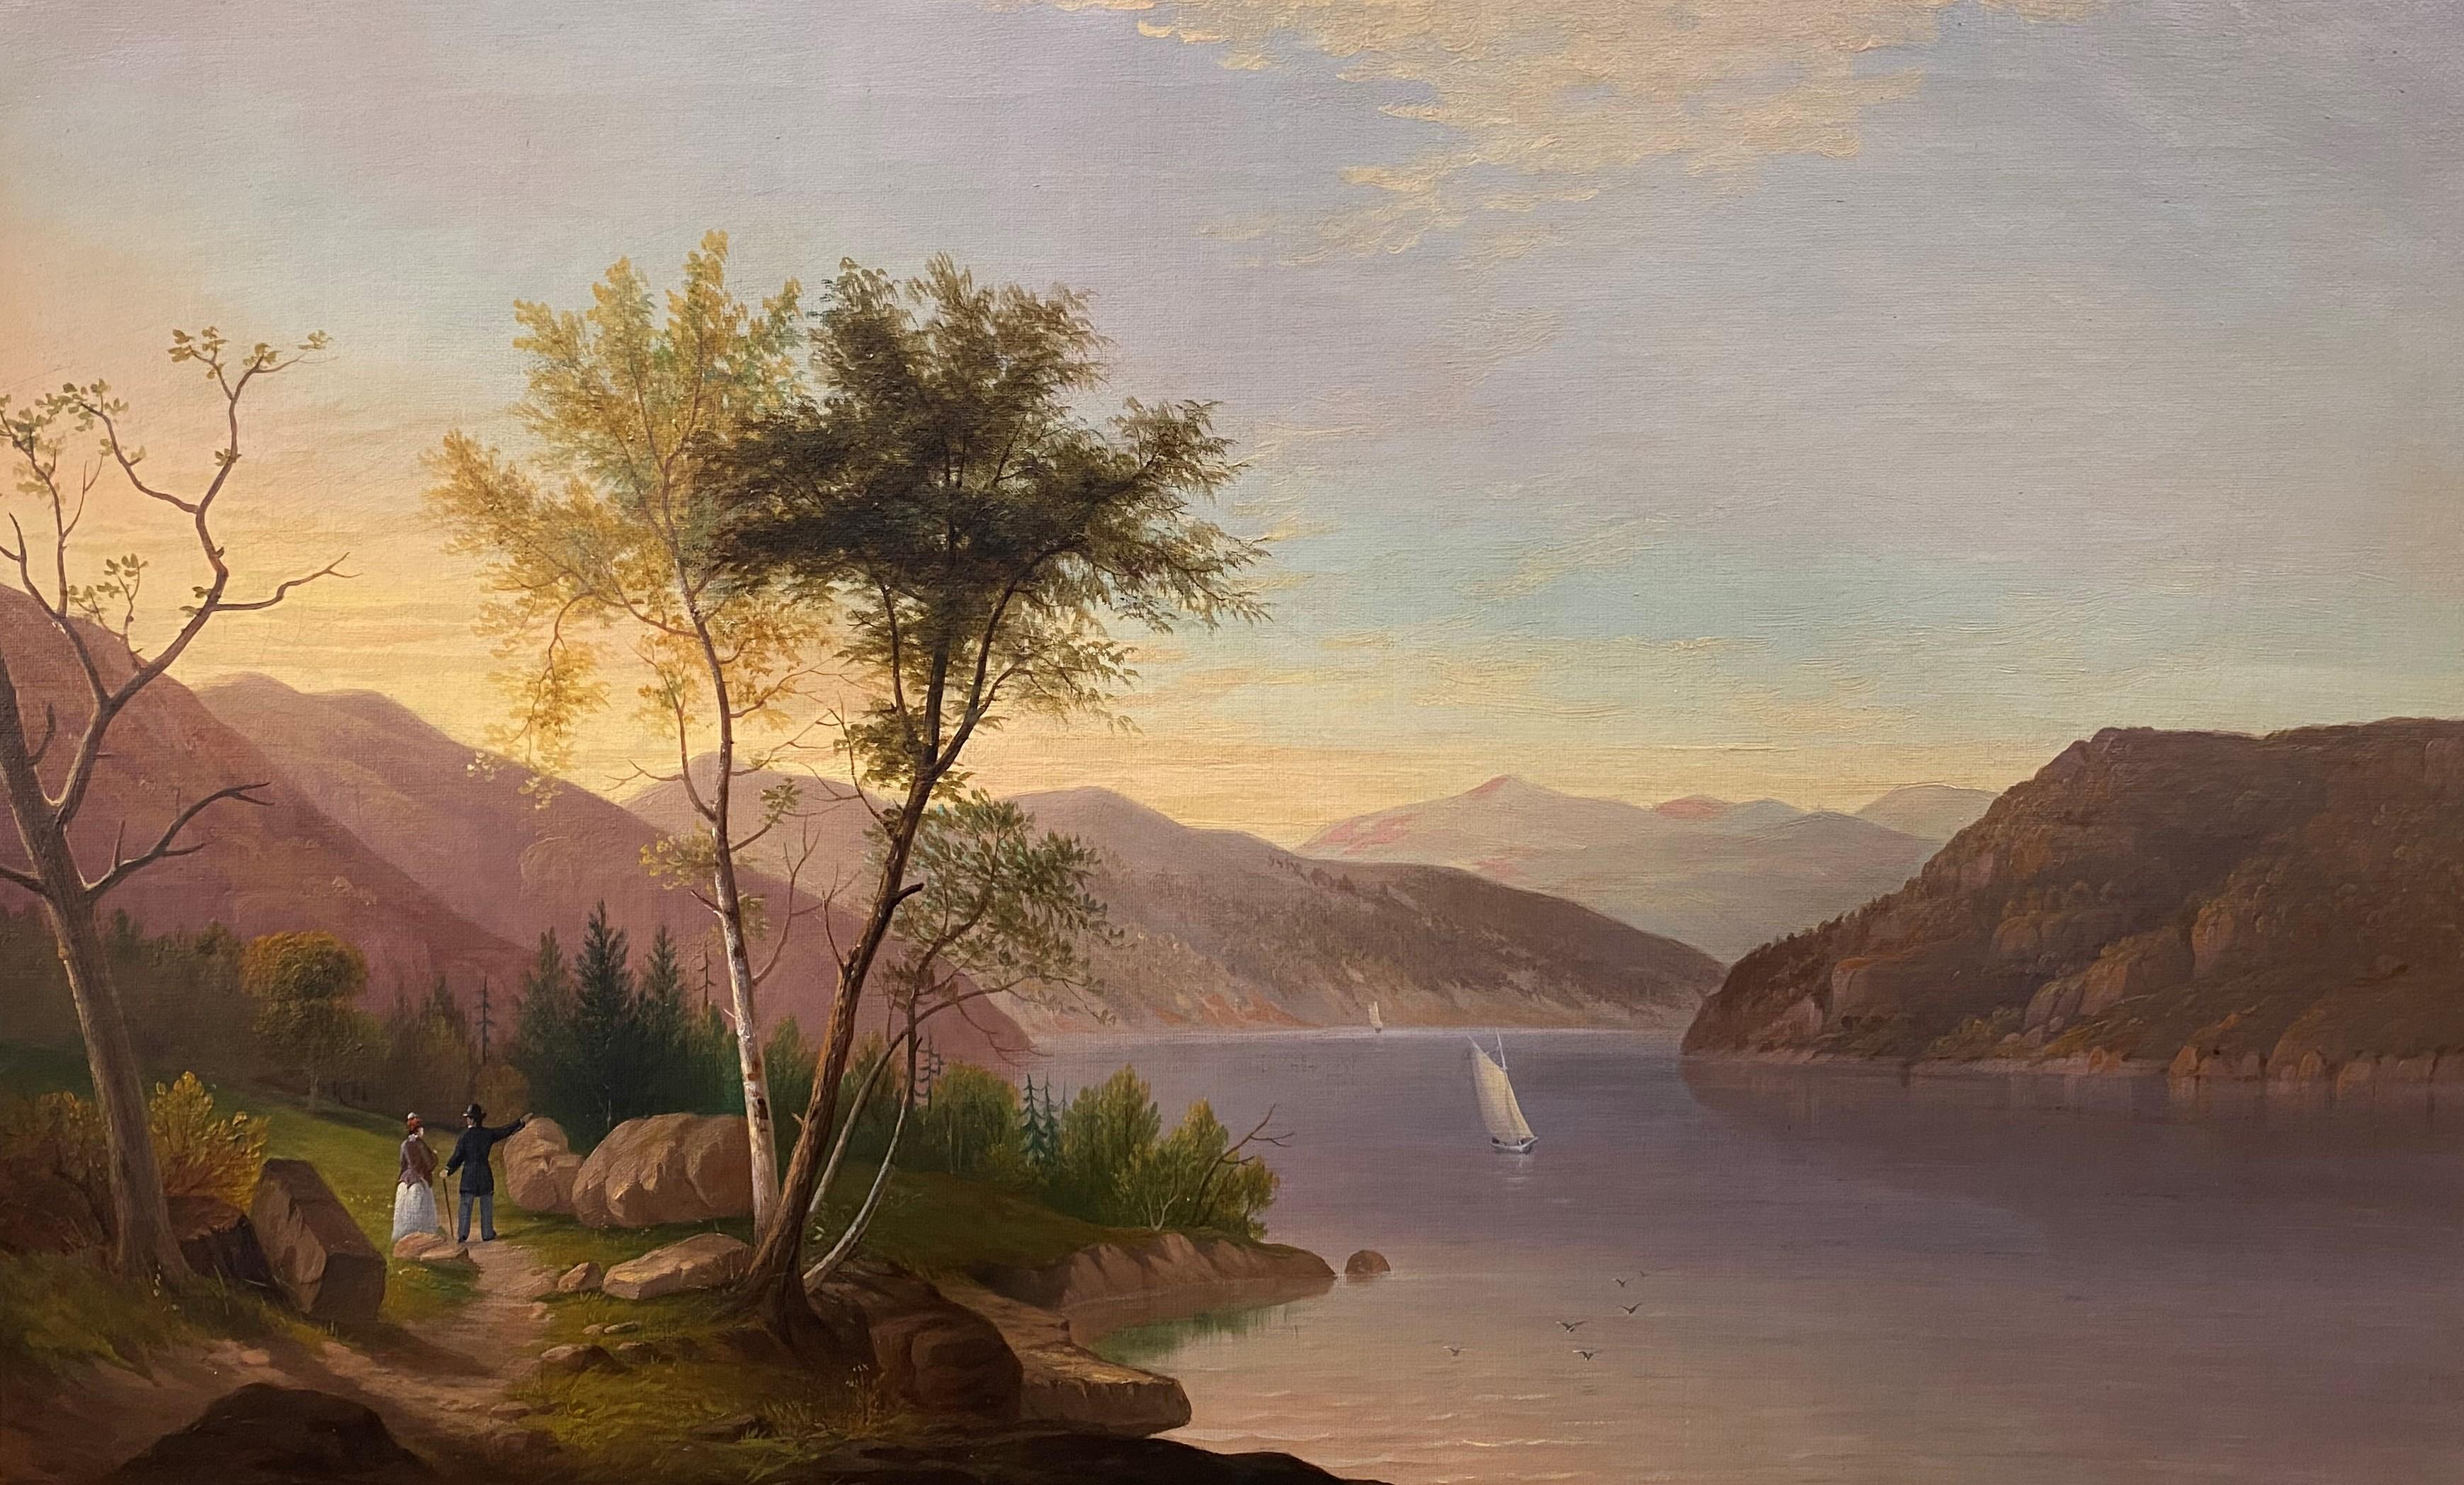 Sunset over Lake George - Painting by 19th century American School